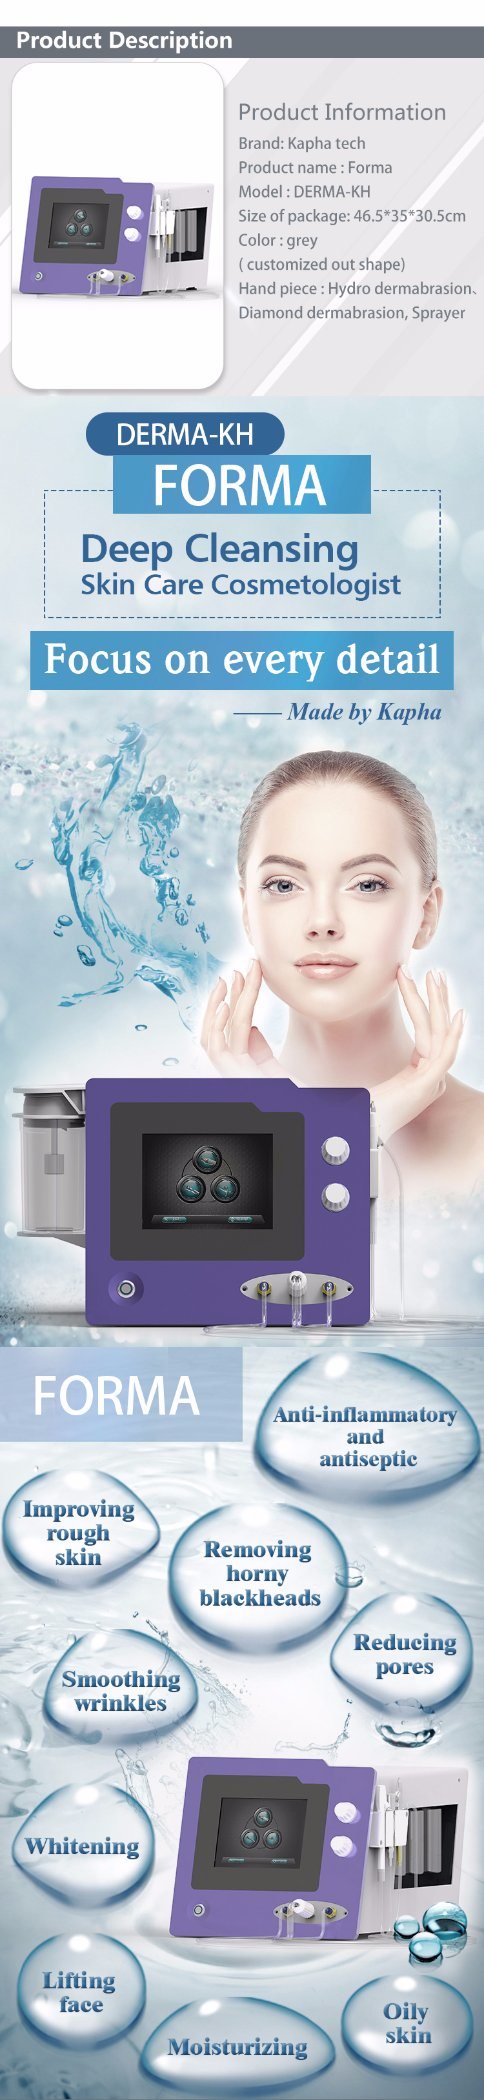 portable Skin Care Machine for Face Lifting Beauty Skin Whitening